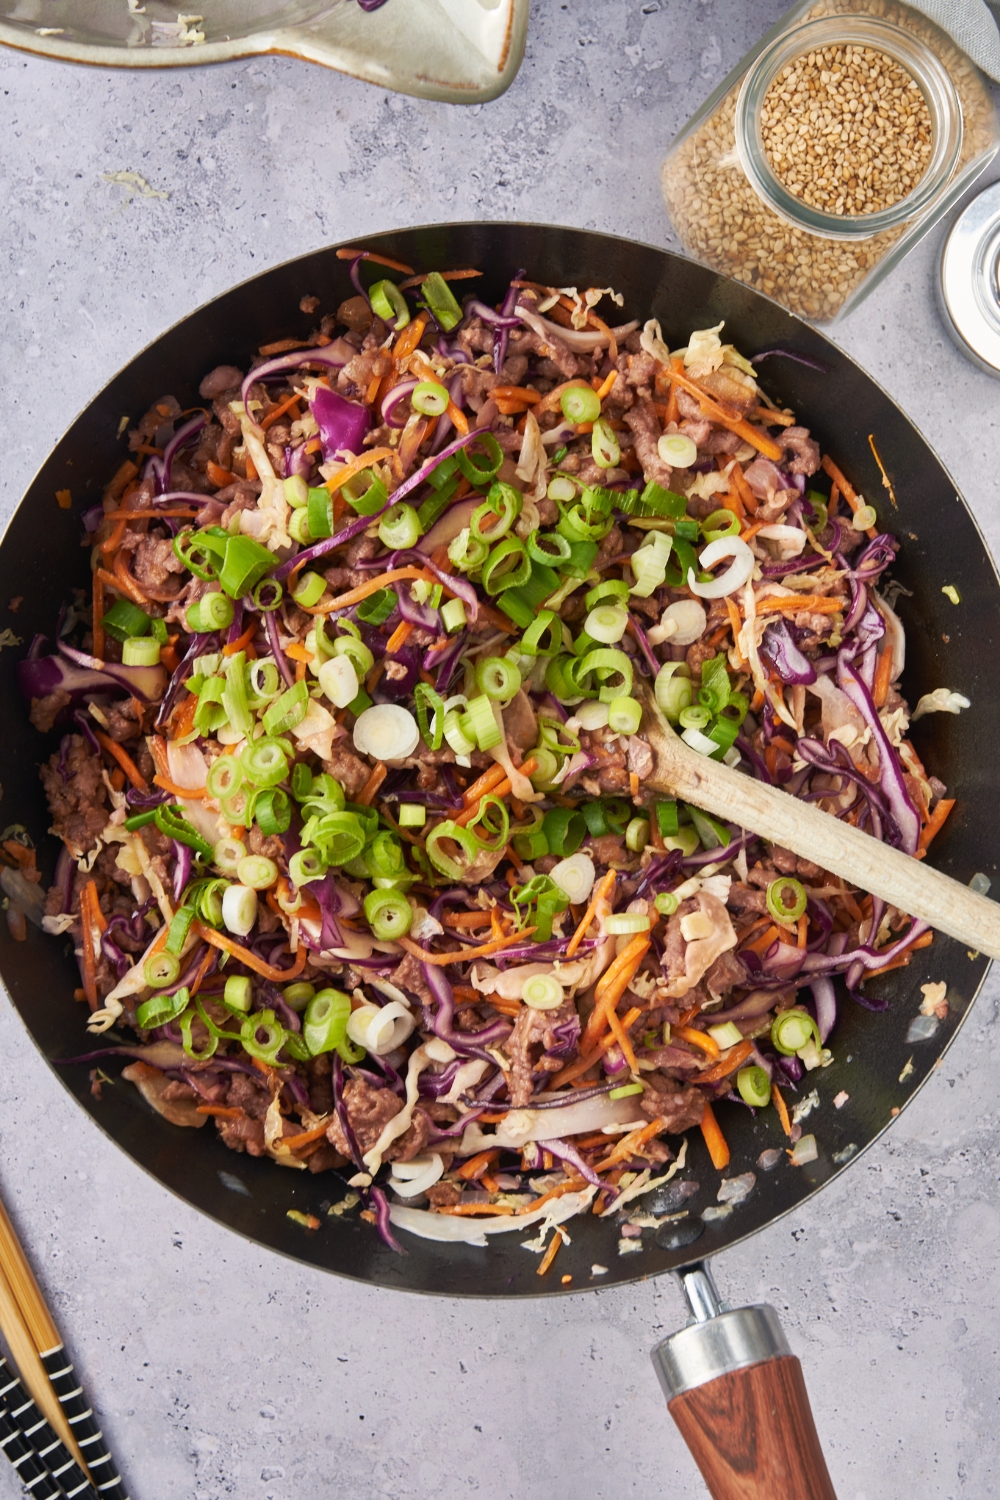 A skillet with the cooked coleslaw topped with green onions.